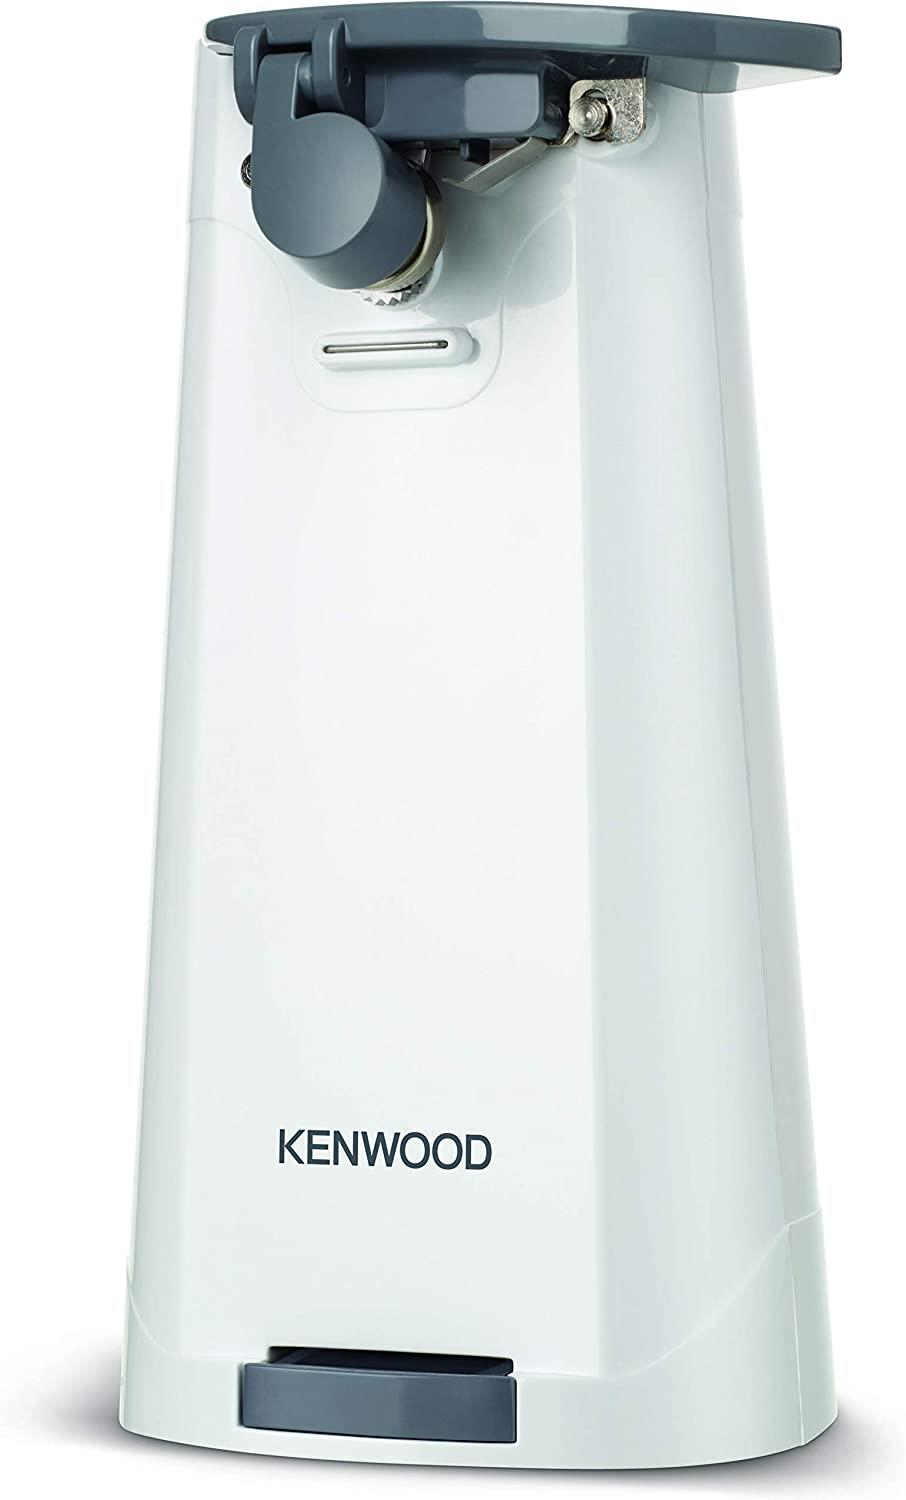 Kenwood Electric Can Tin Bottle Opener Knife Sharpener 3 in 1 CAP70.A0WH - White